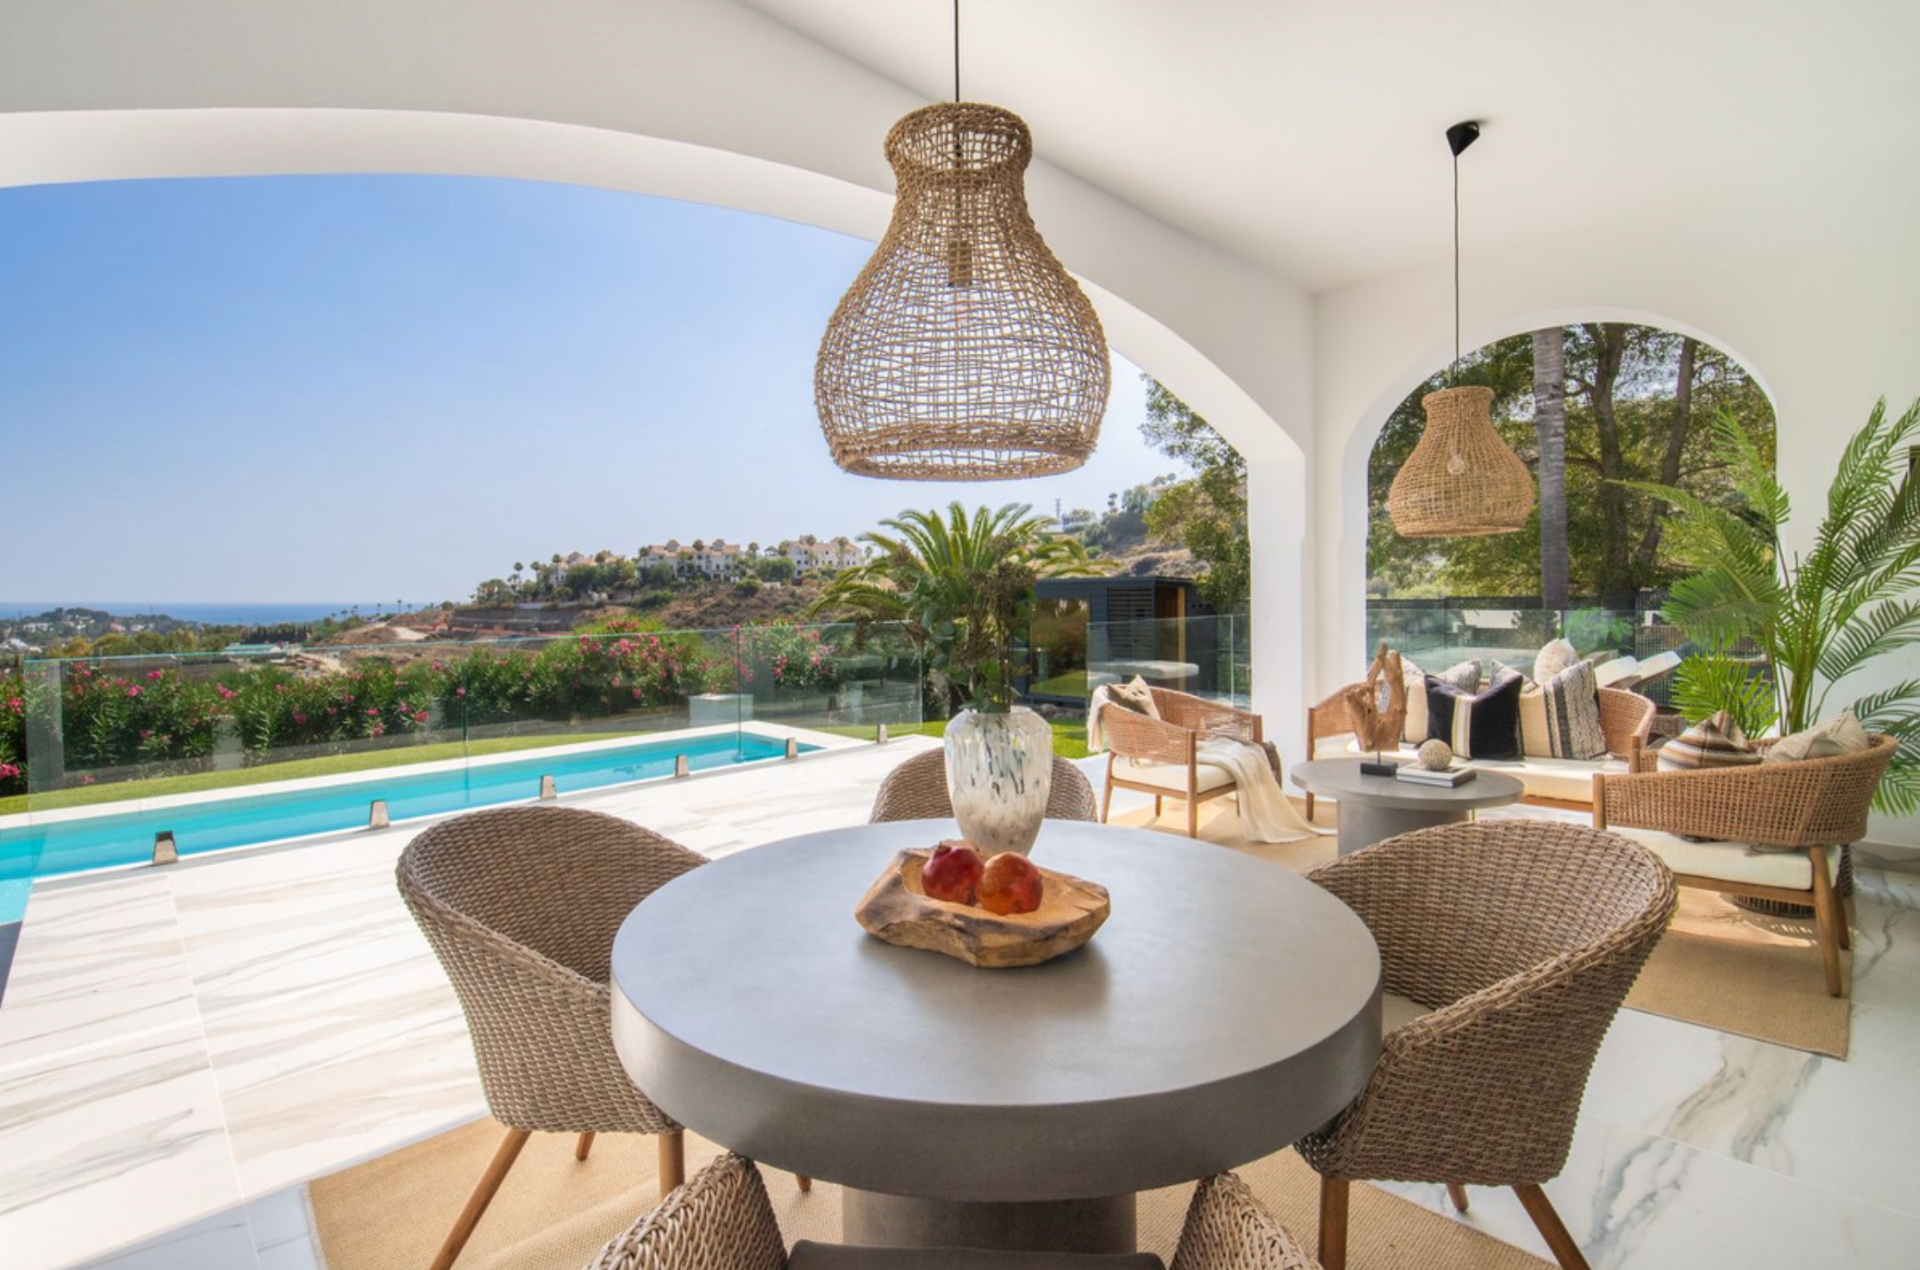 Stunning modern villa completely refurbished and decorated with open views to the sea in El Paraiso